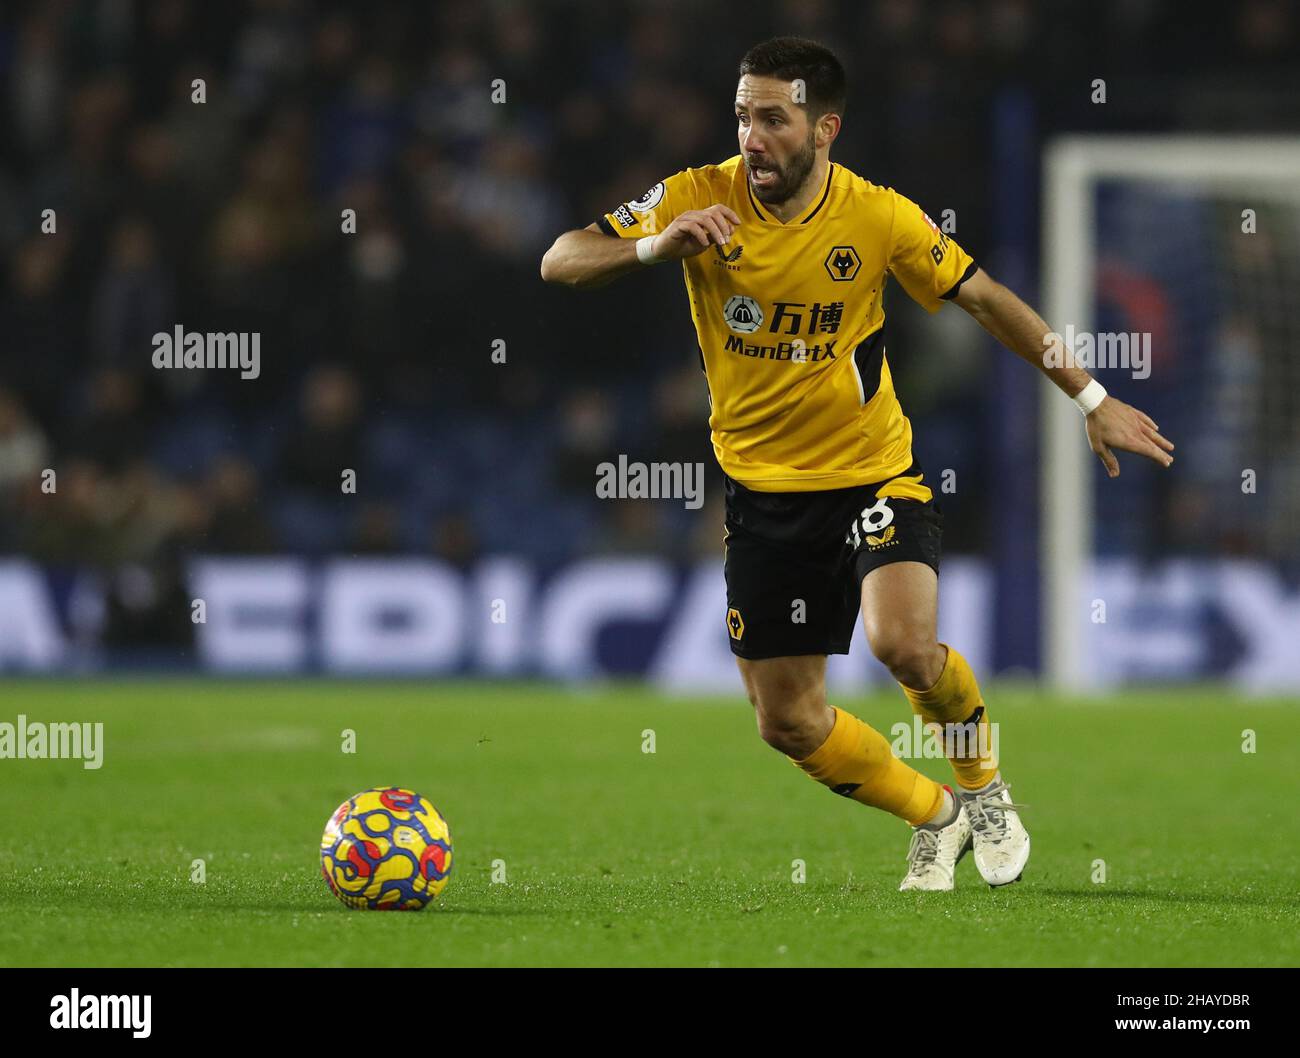 Brighton and Hove, England, 15th December 2021. João Moutinho of Wolverhampton Wanderers during the Premier League match at the AMEX Stadium, Brighton and Hove. Picture credit should read: Paul Terry / Sportimage Stock Photo